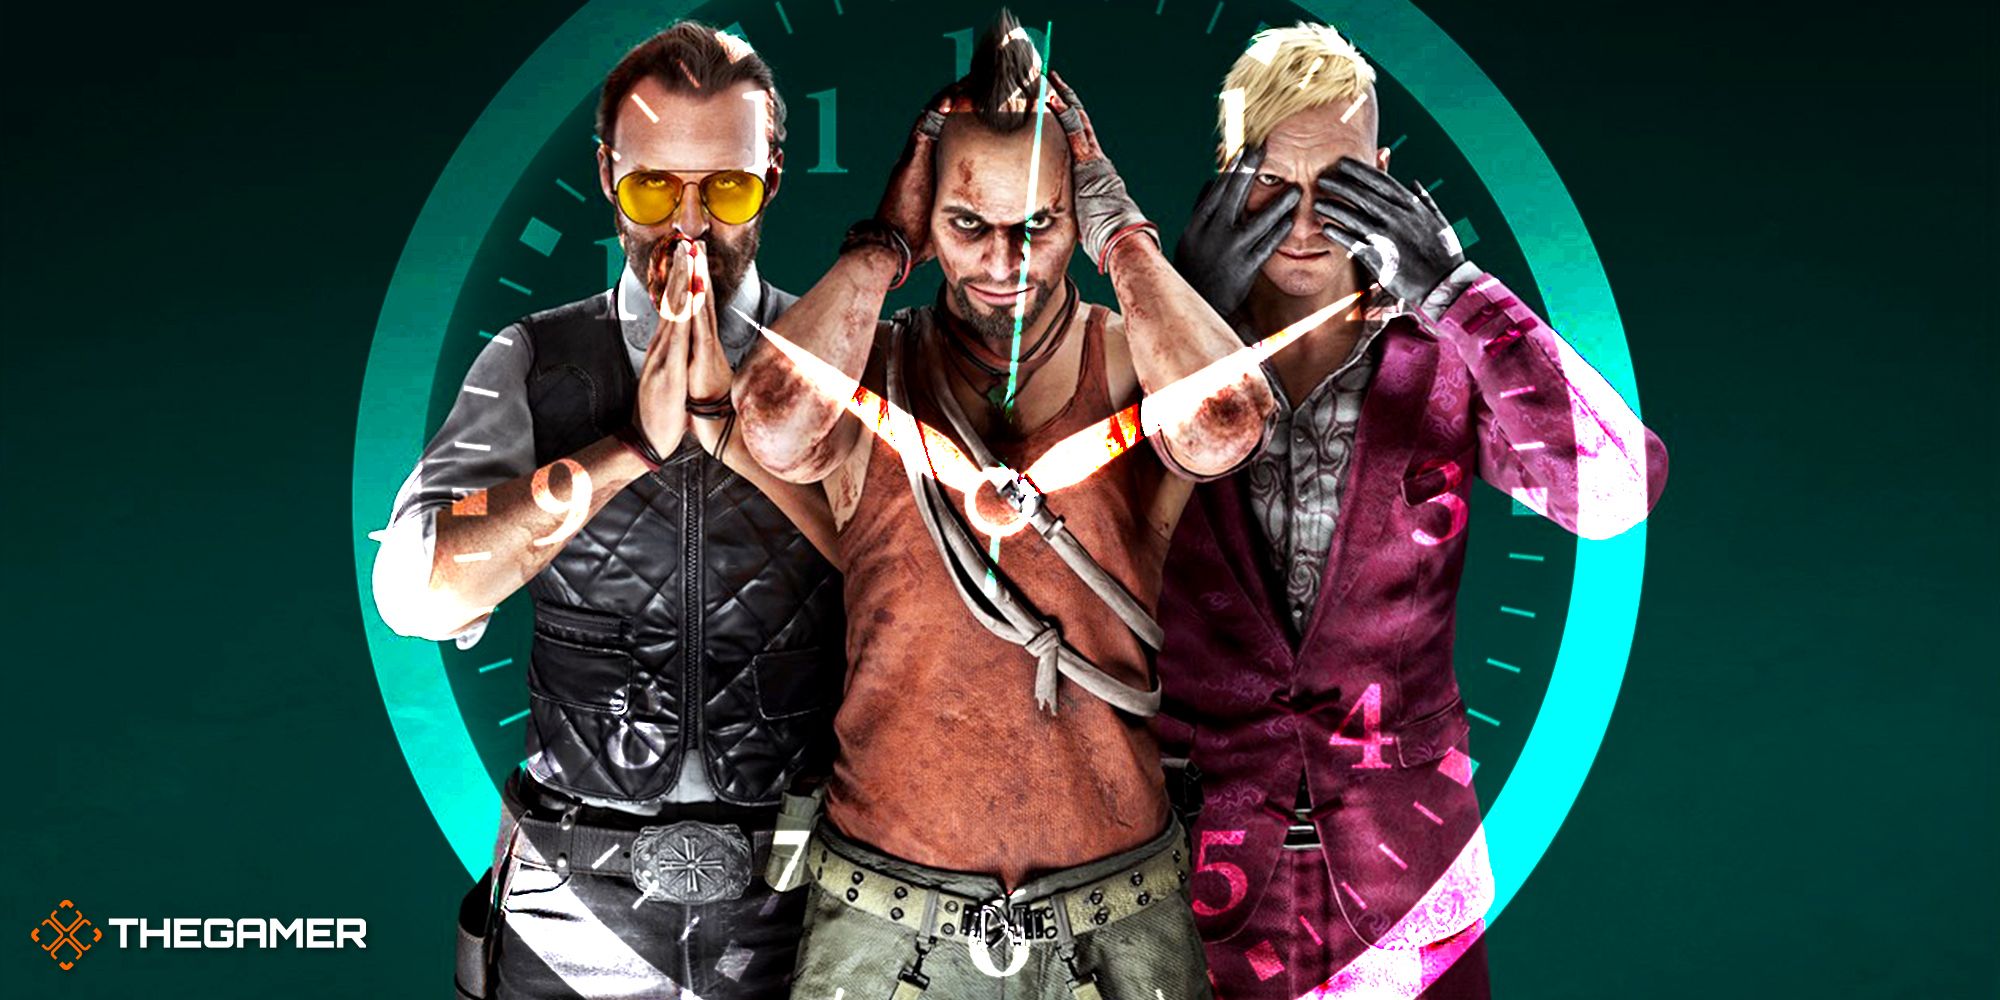 Villains from Far Cry 5, 3, and 4 making the speak no evil, hear no evil, see no evil pose, with a ticking clock superimposed behind them and the clock's hands in front